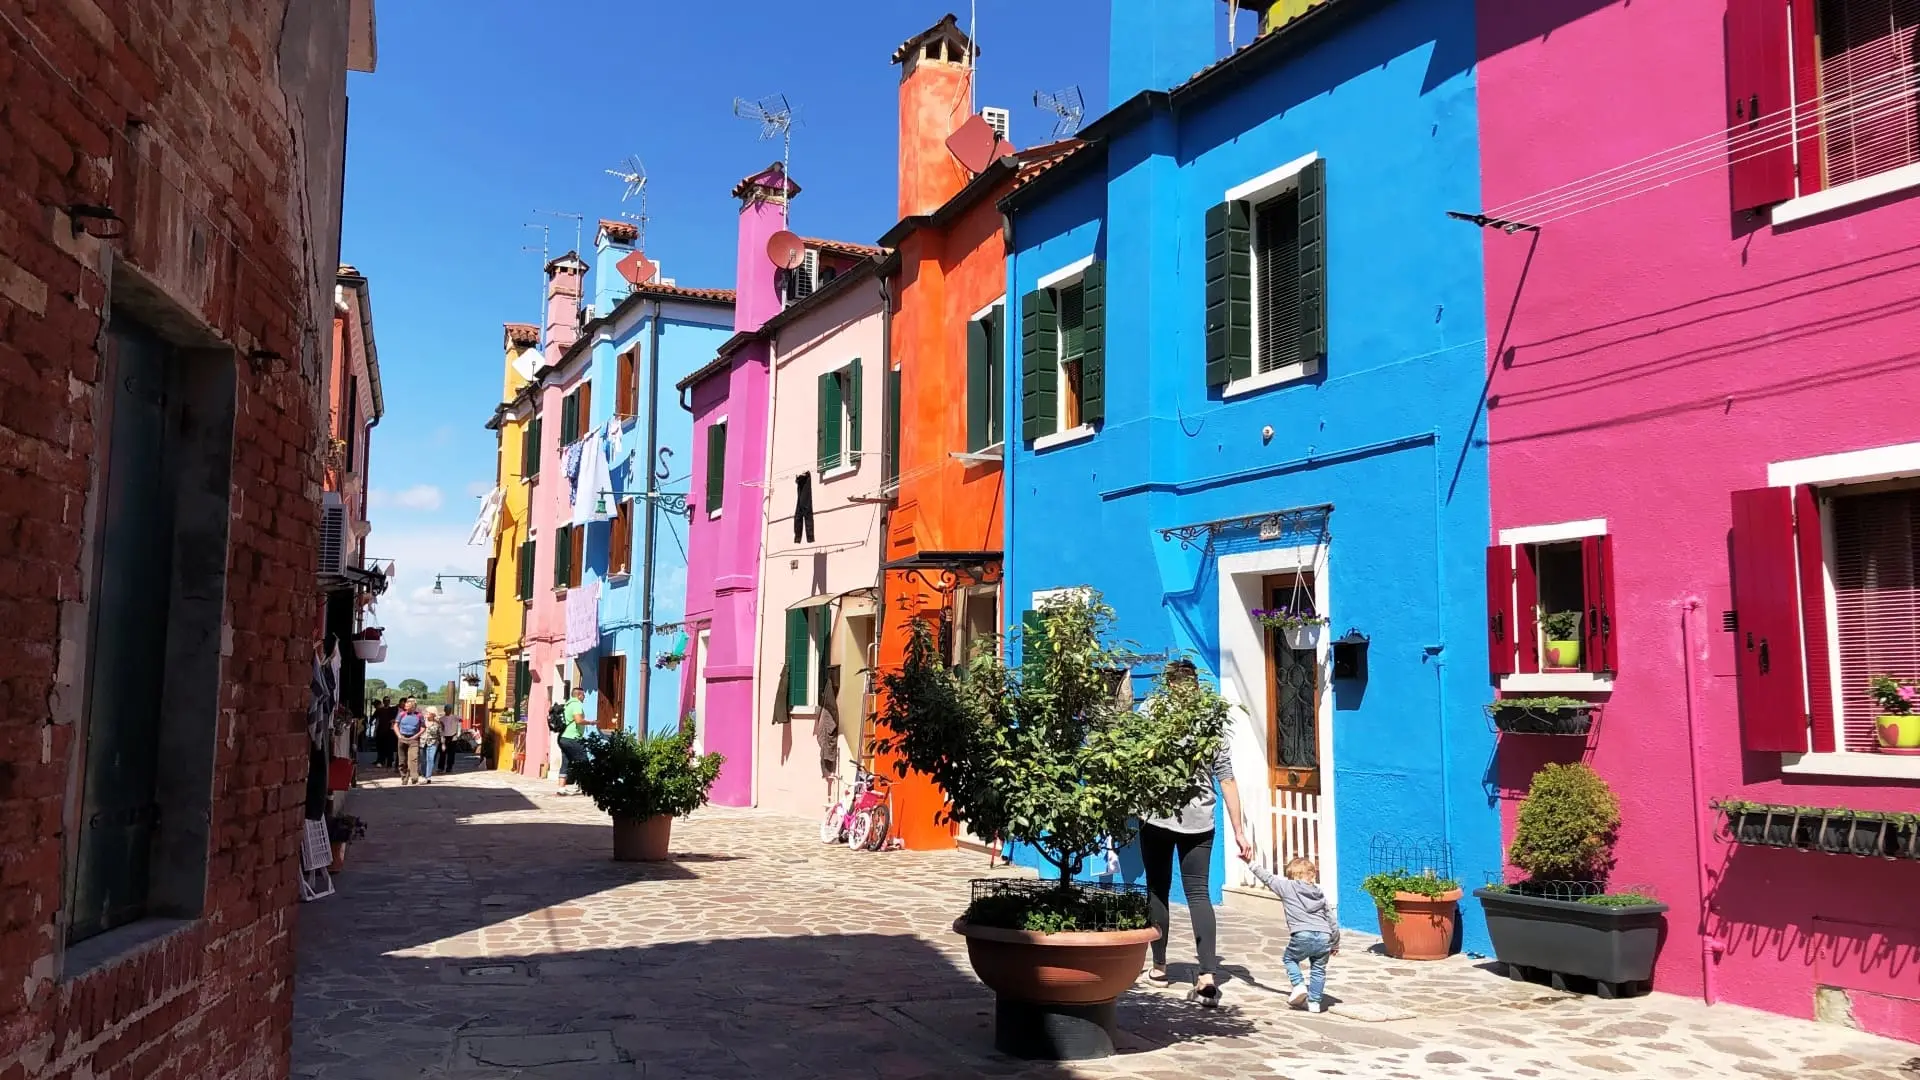 Full-day tour to Murano, Burano and Torcello islands from Jesolo-Punta Sabbioni